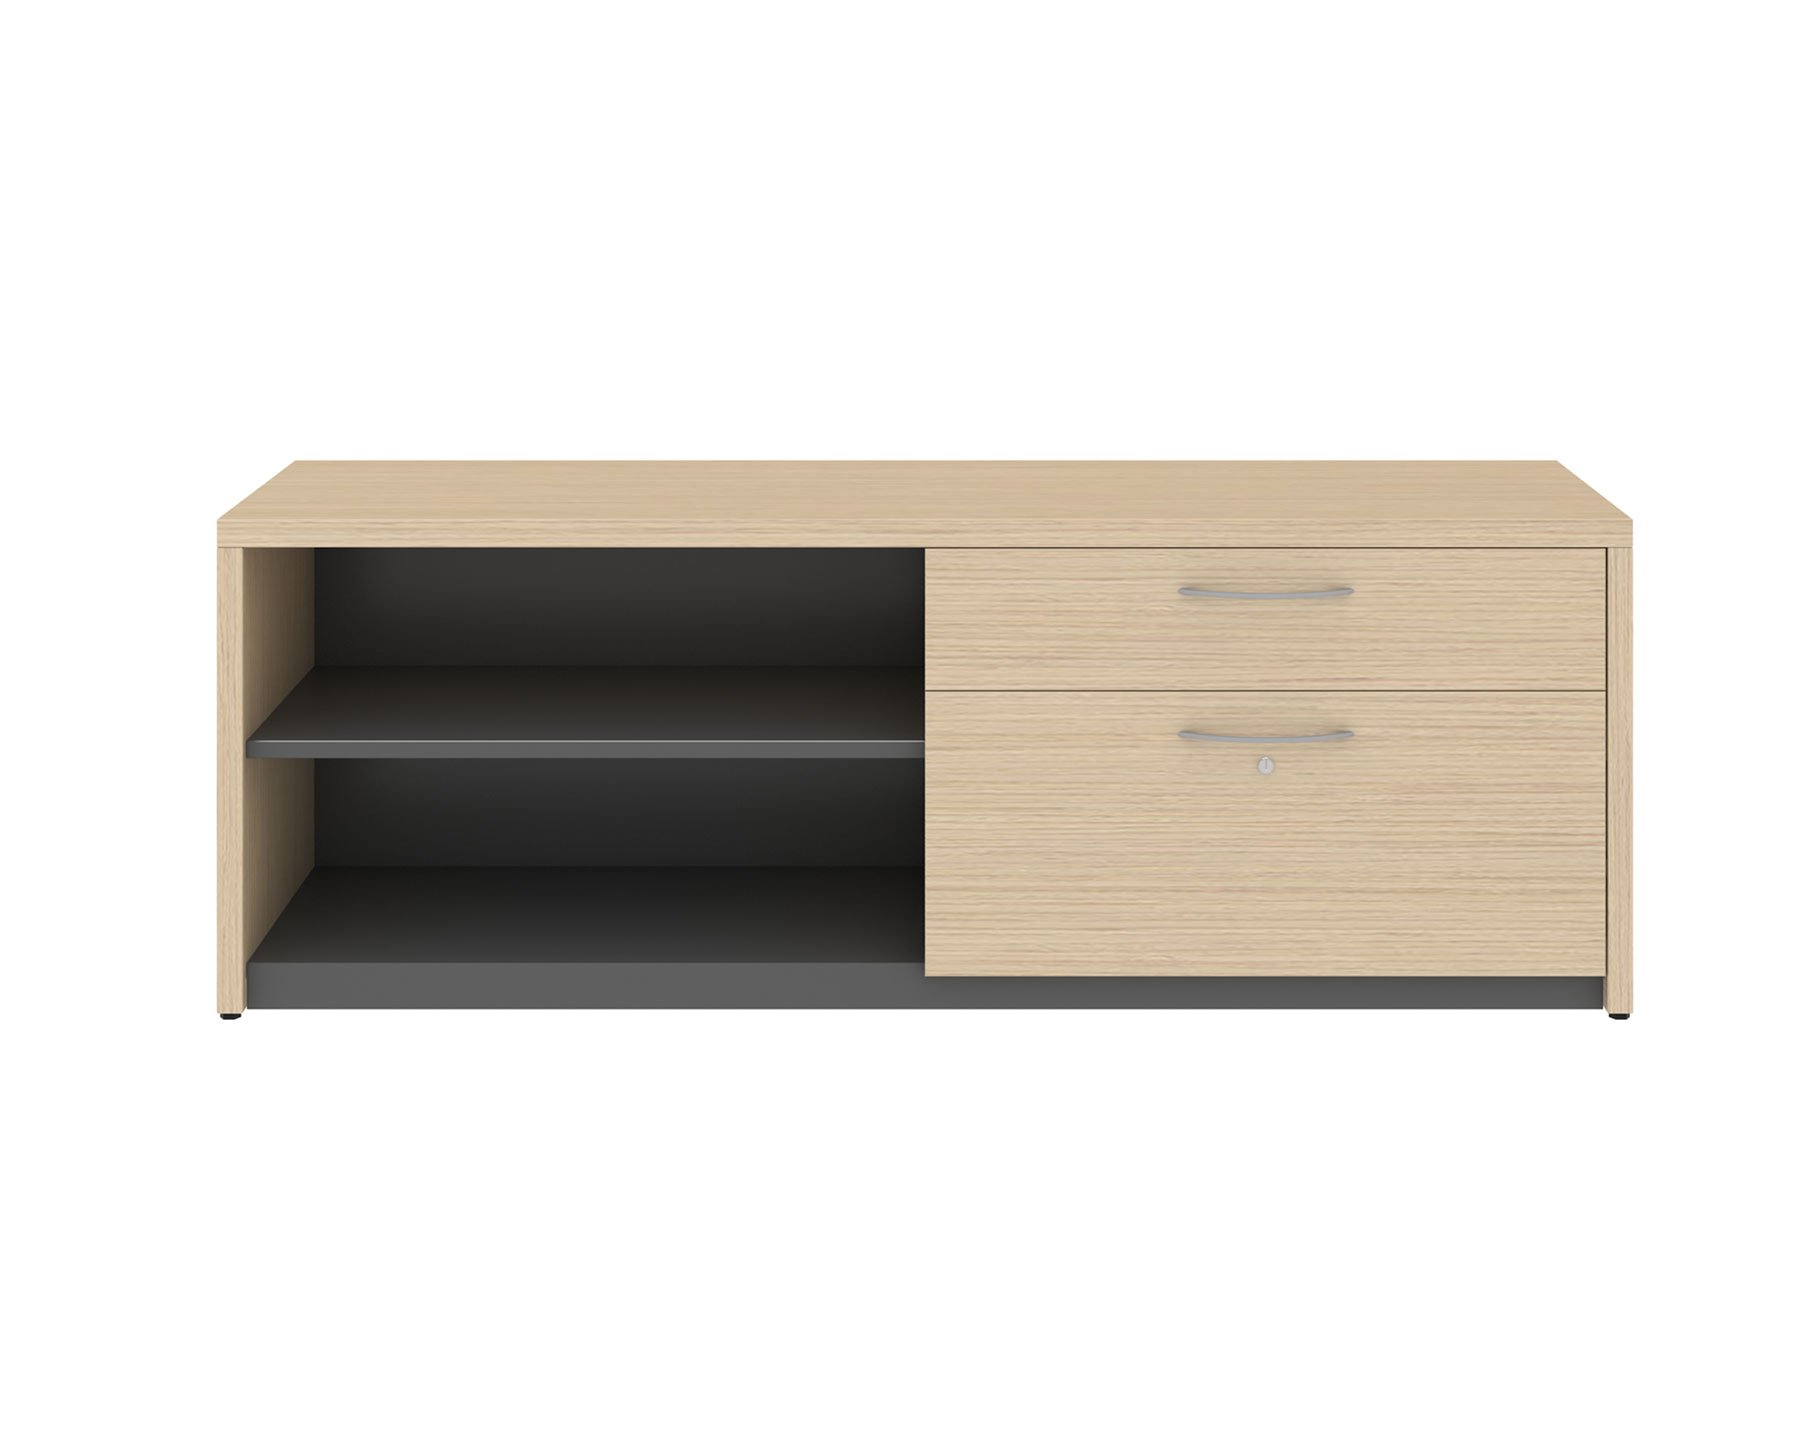 Light wooden A Series credenza with open shelves and box, file drawers with crescent drawer pulls 